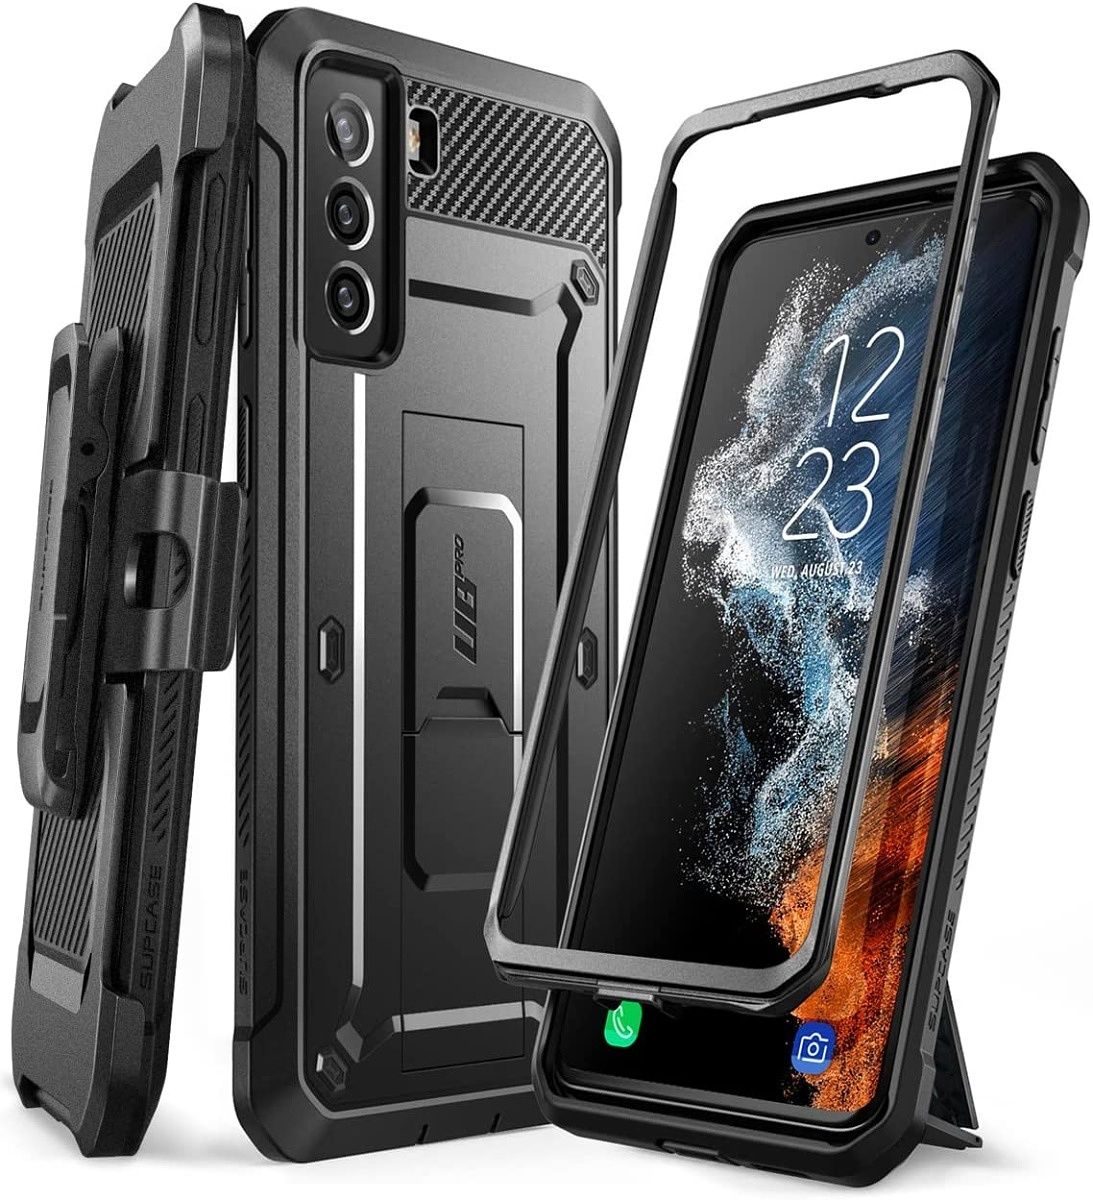 This case from SUPCASE features a dual-layer rugged body for the best-in-class protection. Also comes with a built-in kickstand and a detachable rotating belt clip. 